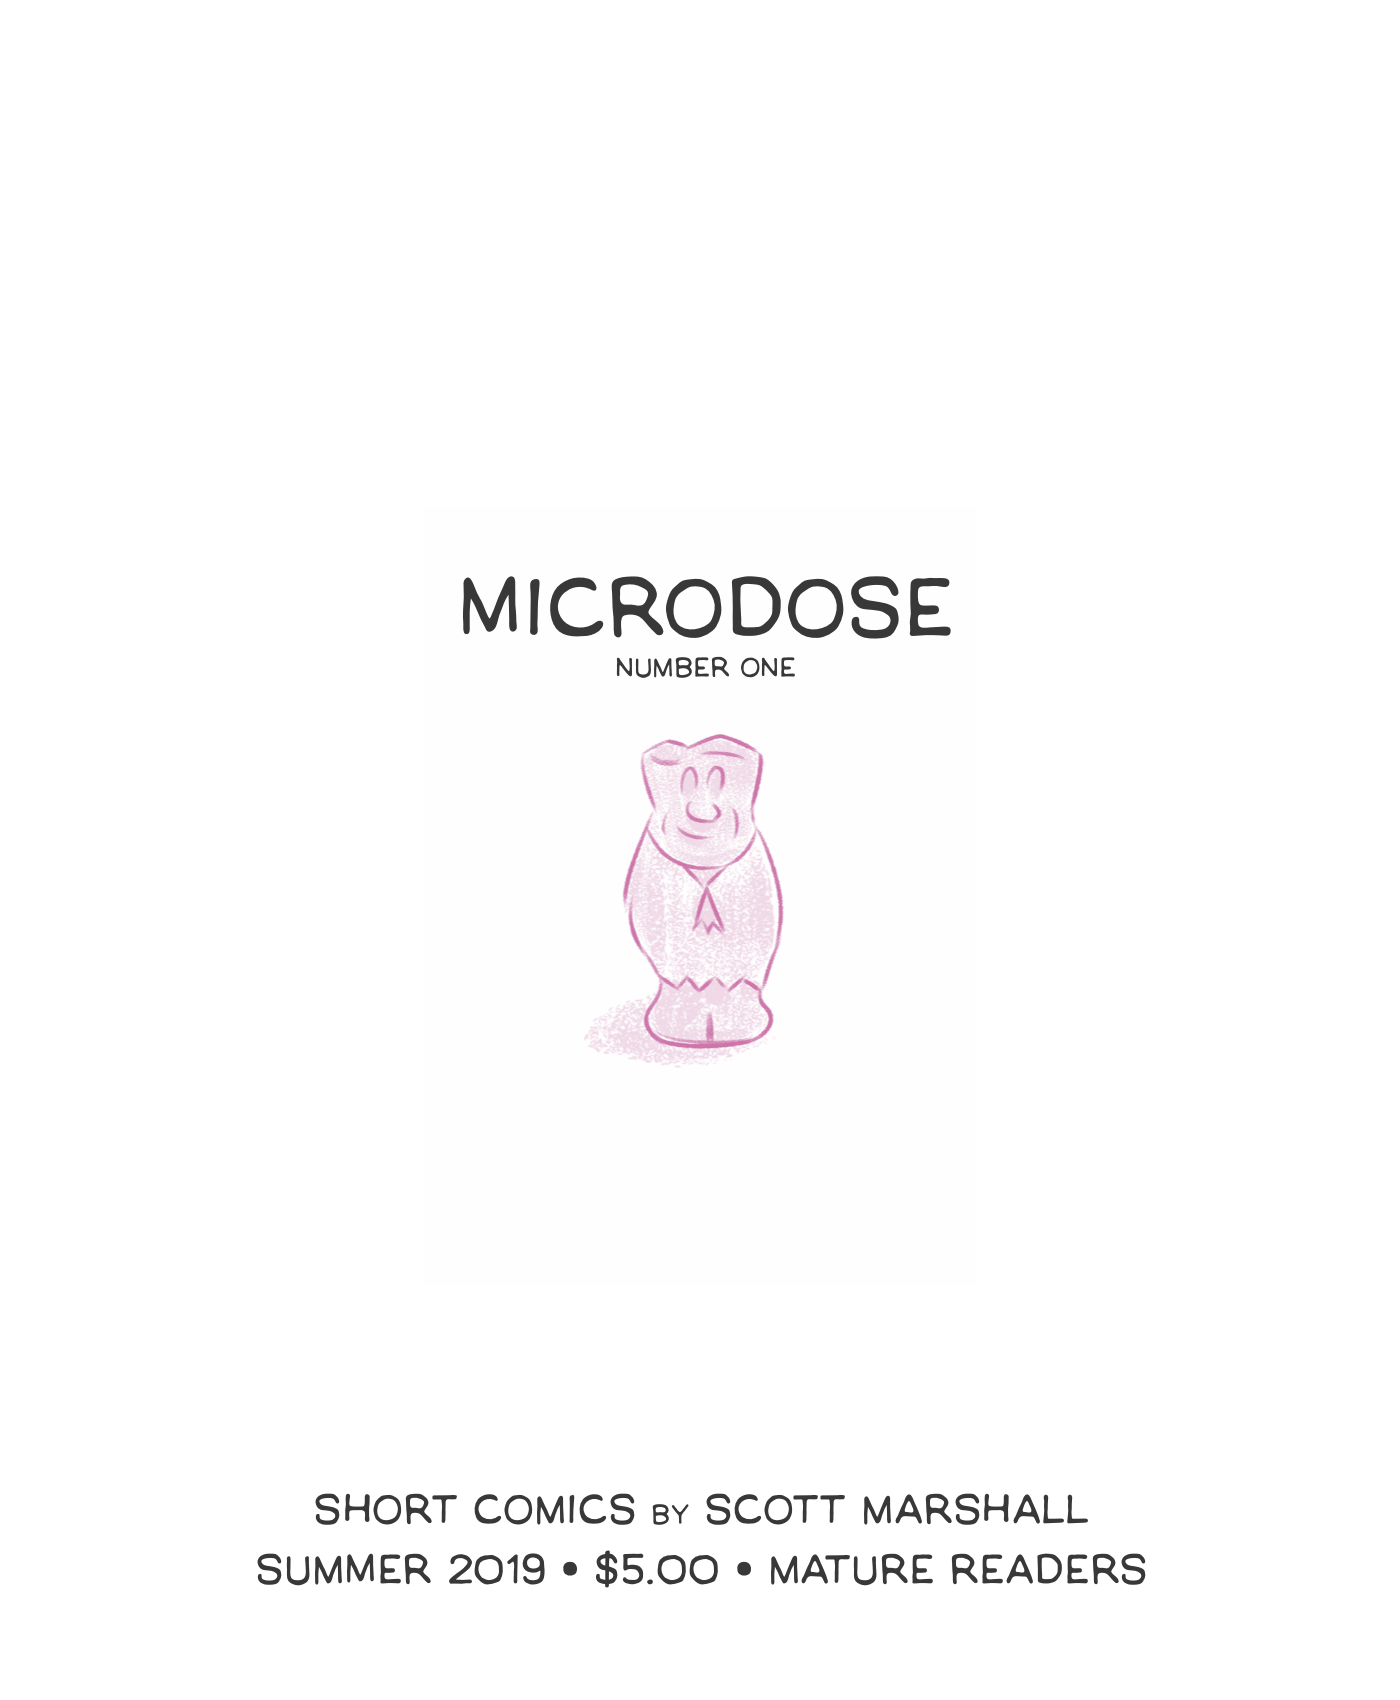 Cover art for Microdose #1 by Scott Marshall